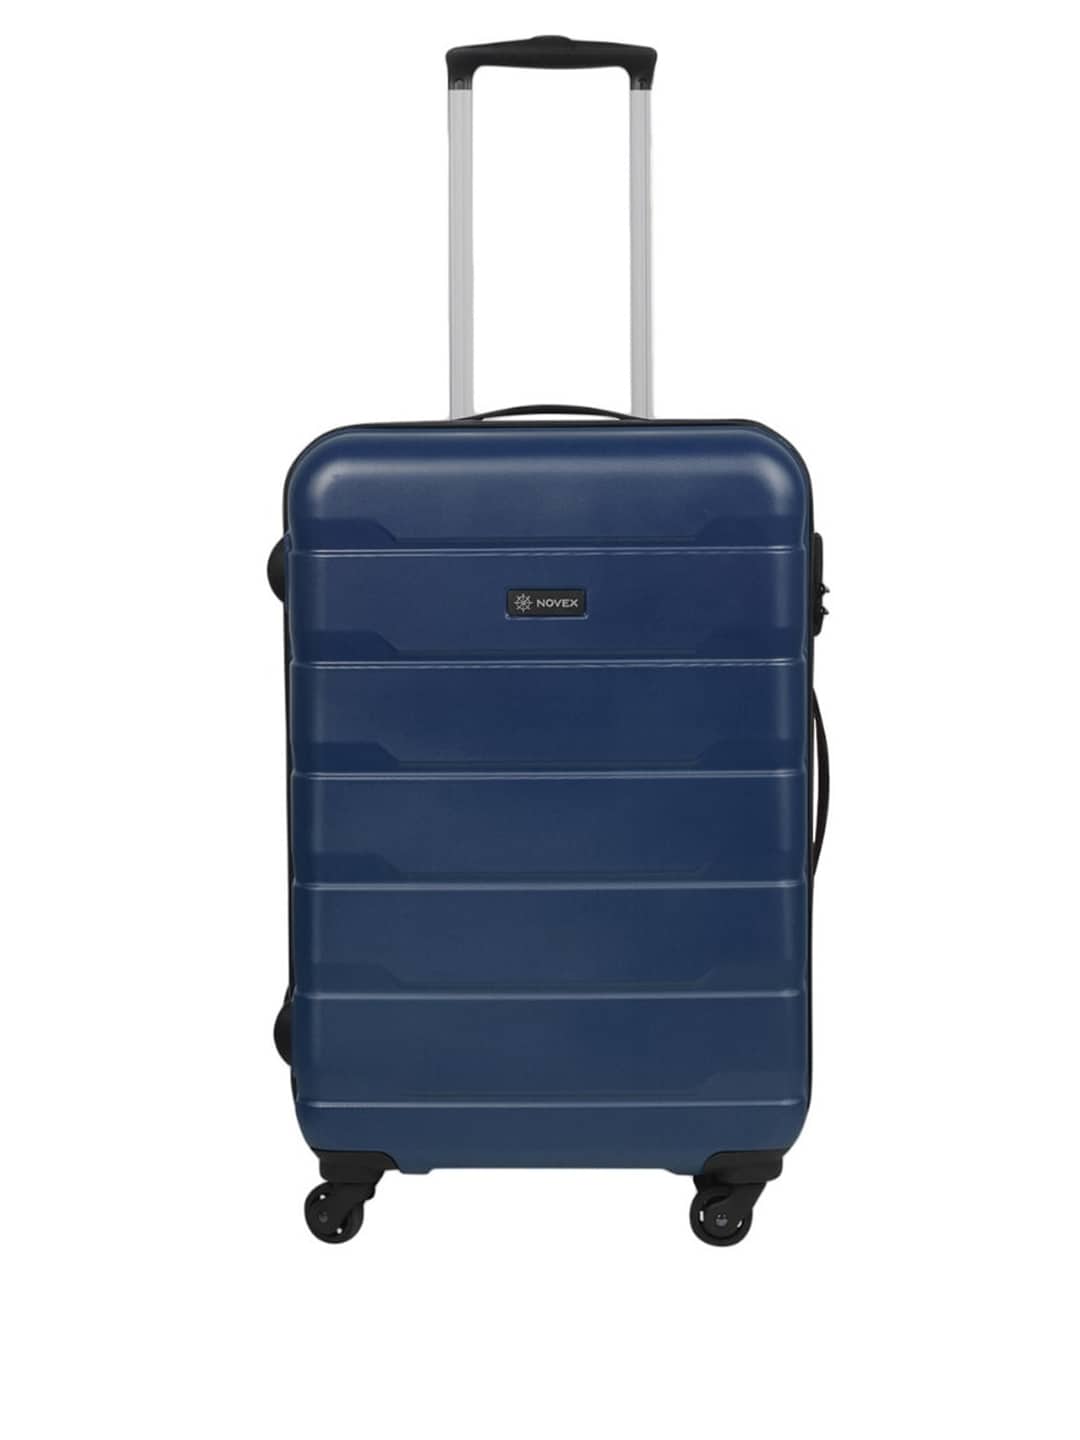 NOVEX Unisex Blue Solid Hard Luggage Cabin Trolley Bag Price in India